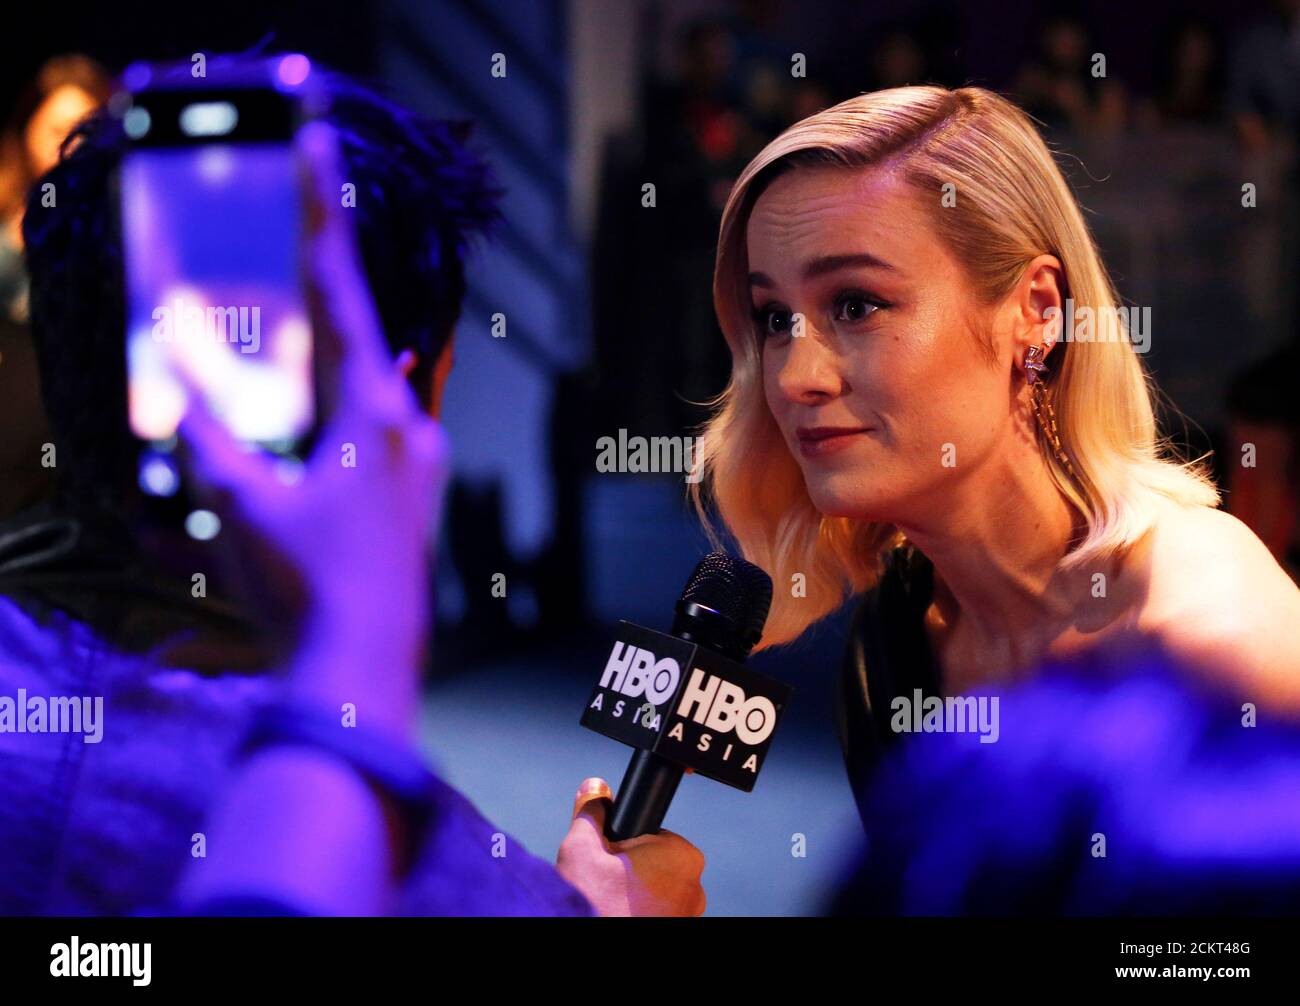 Captain Marvel cast member Brie Larson speaks to the media at a fan event  in Singapore, February 14, 2019. REUTERS/Feline Lim Stock Photo - Alamy